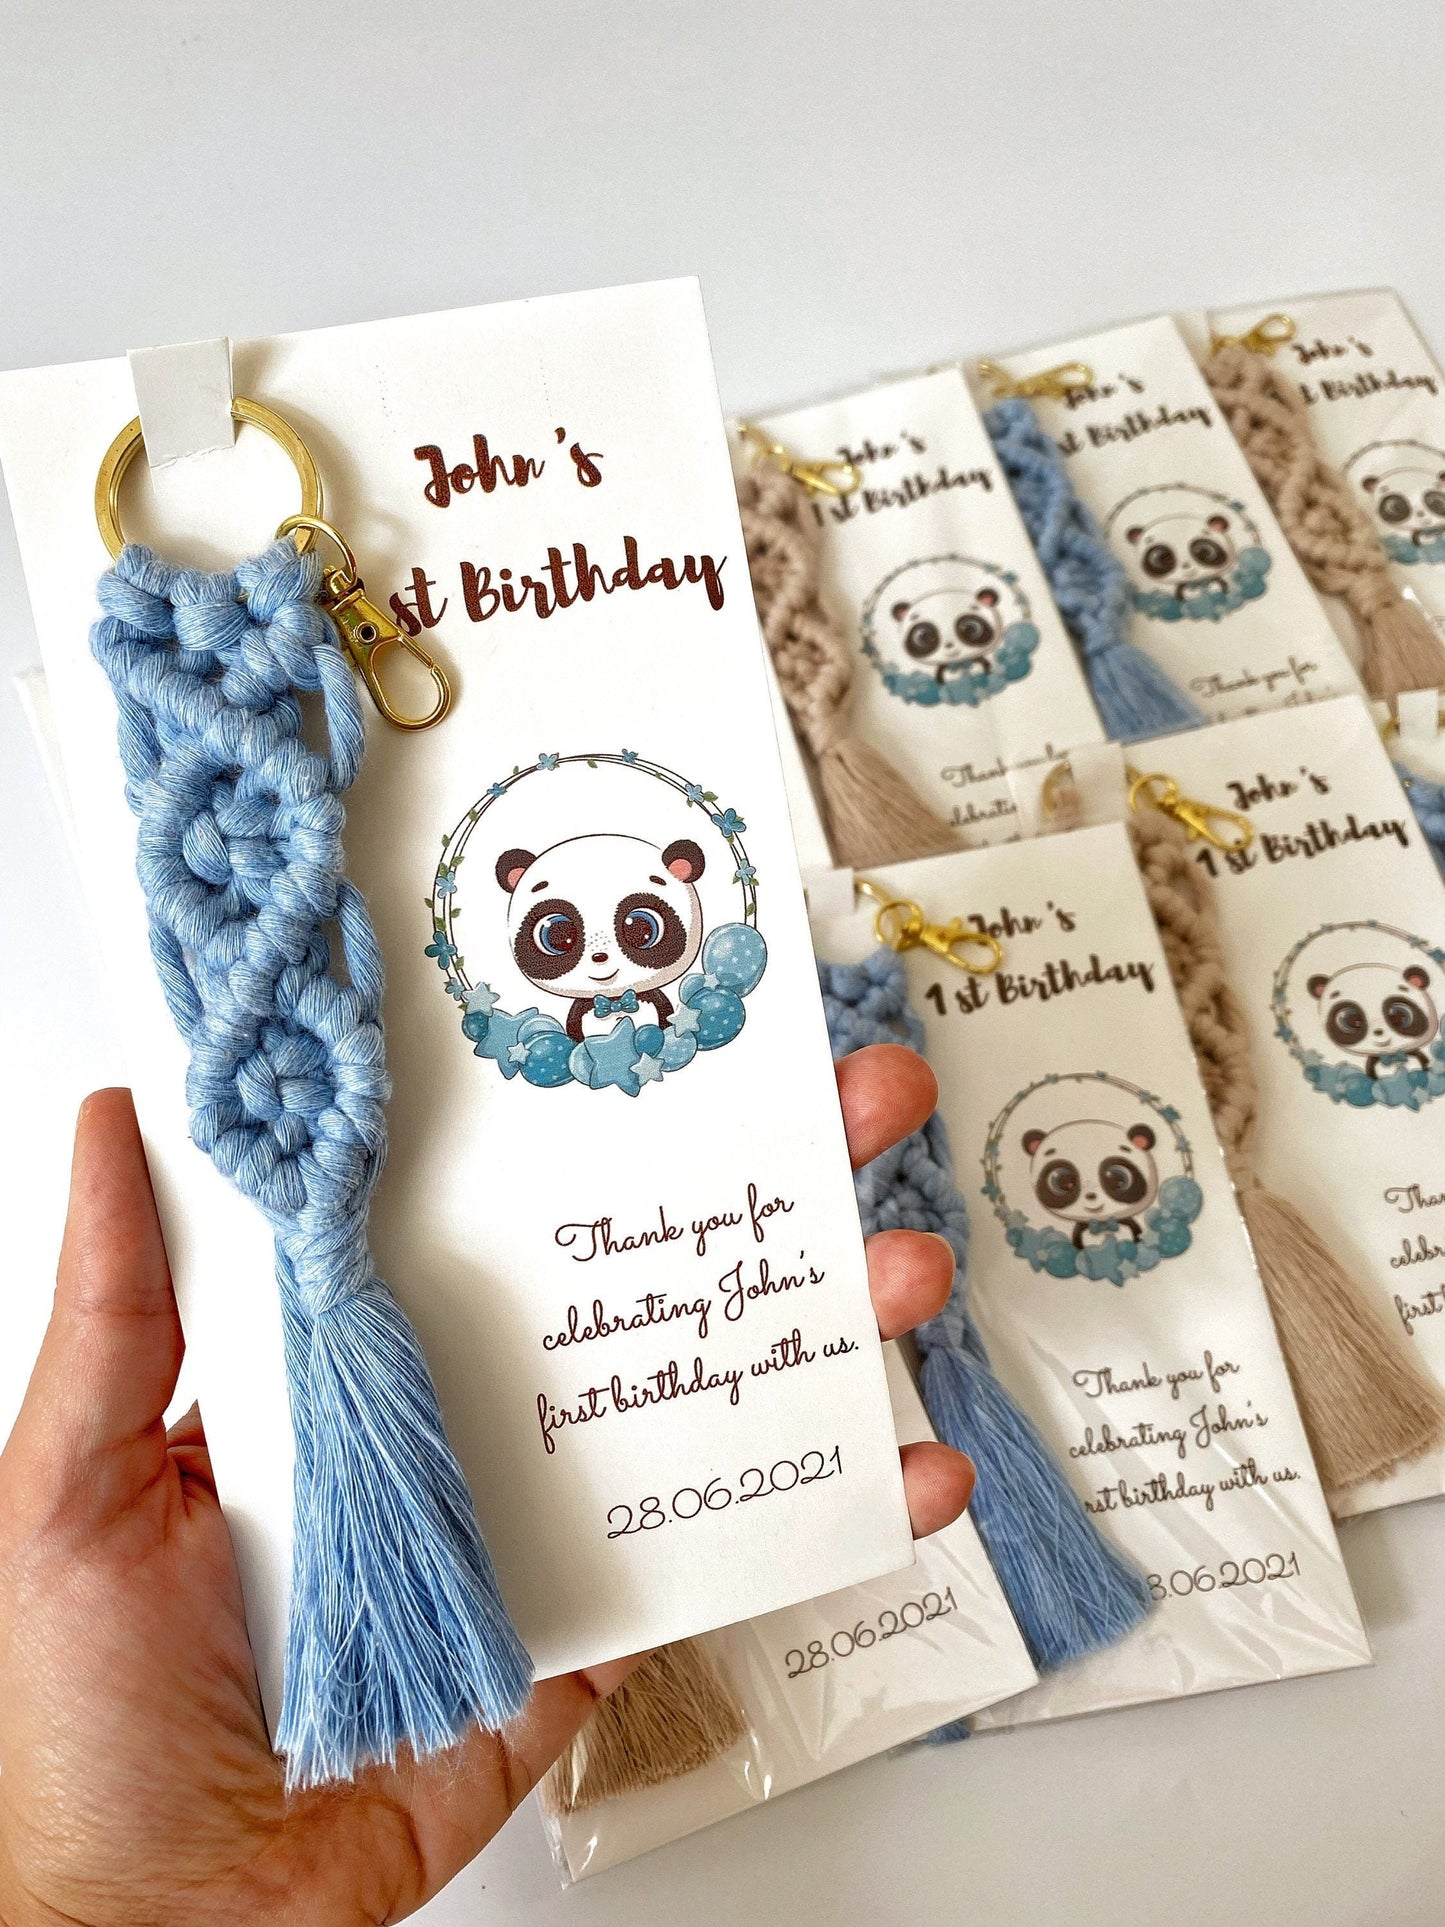 1-100 PCS WHOLESALE Macrame Keychain Thank You Note,BULK Welcome Baby Favor,Baptism Babyshower Baby Gender Reveal Birthday Welcoming Favors